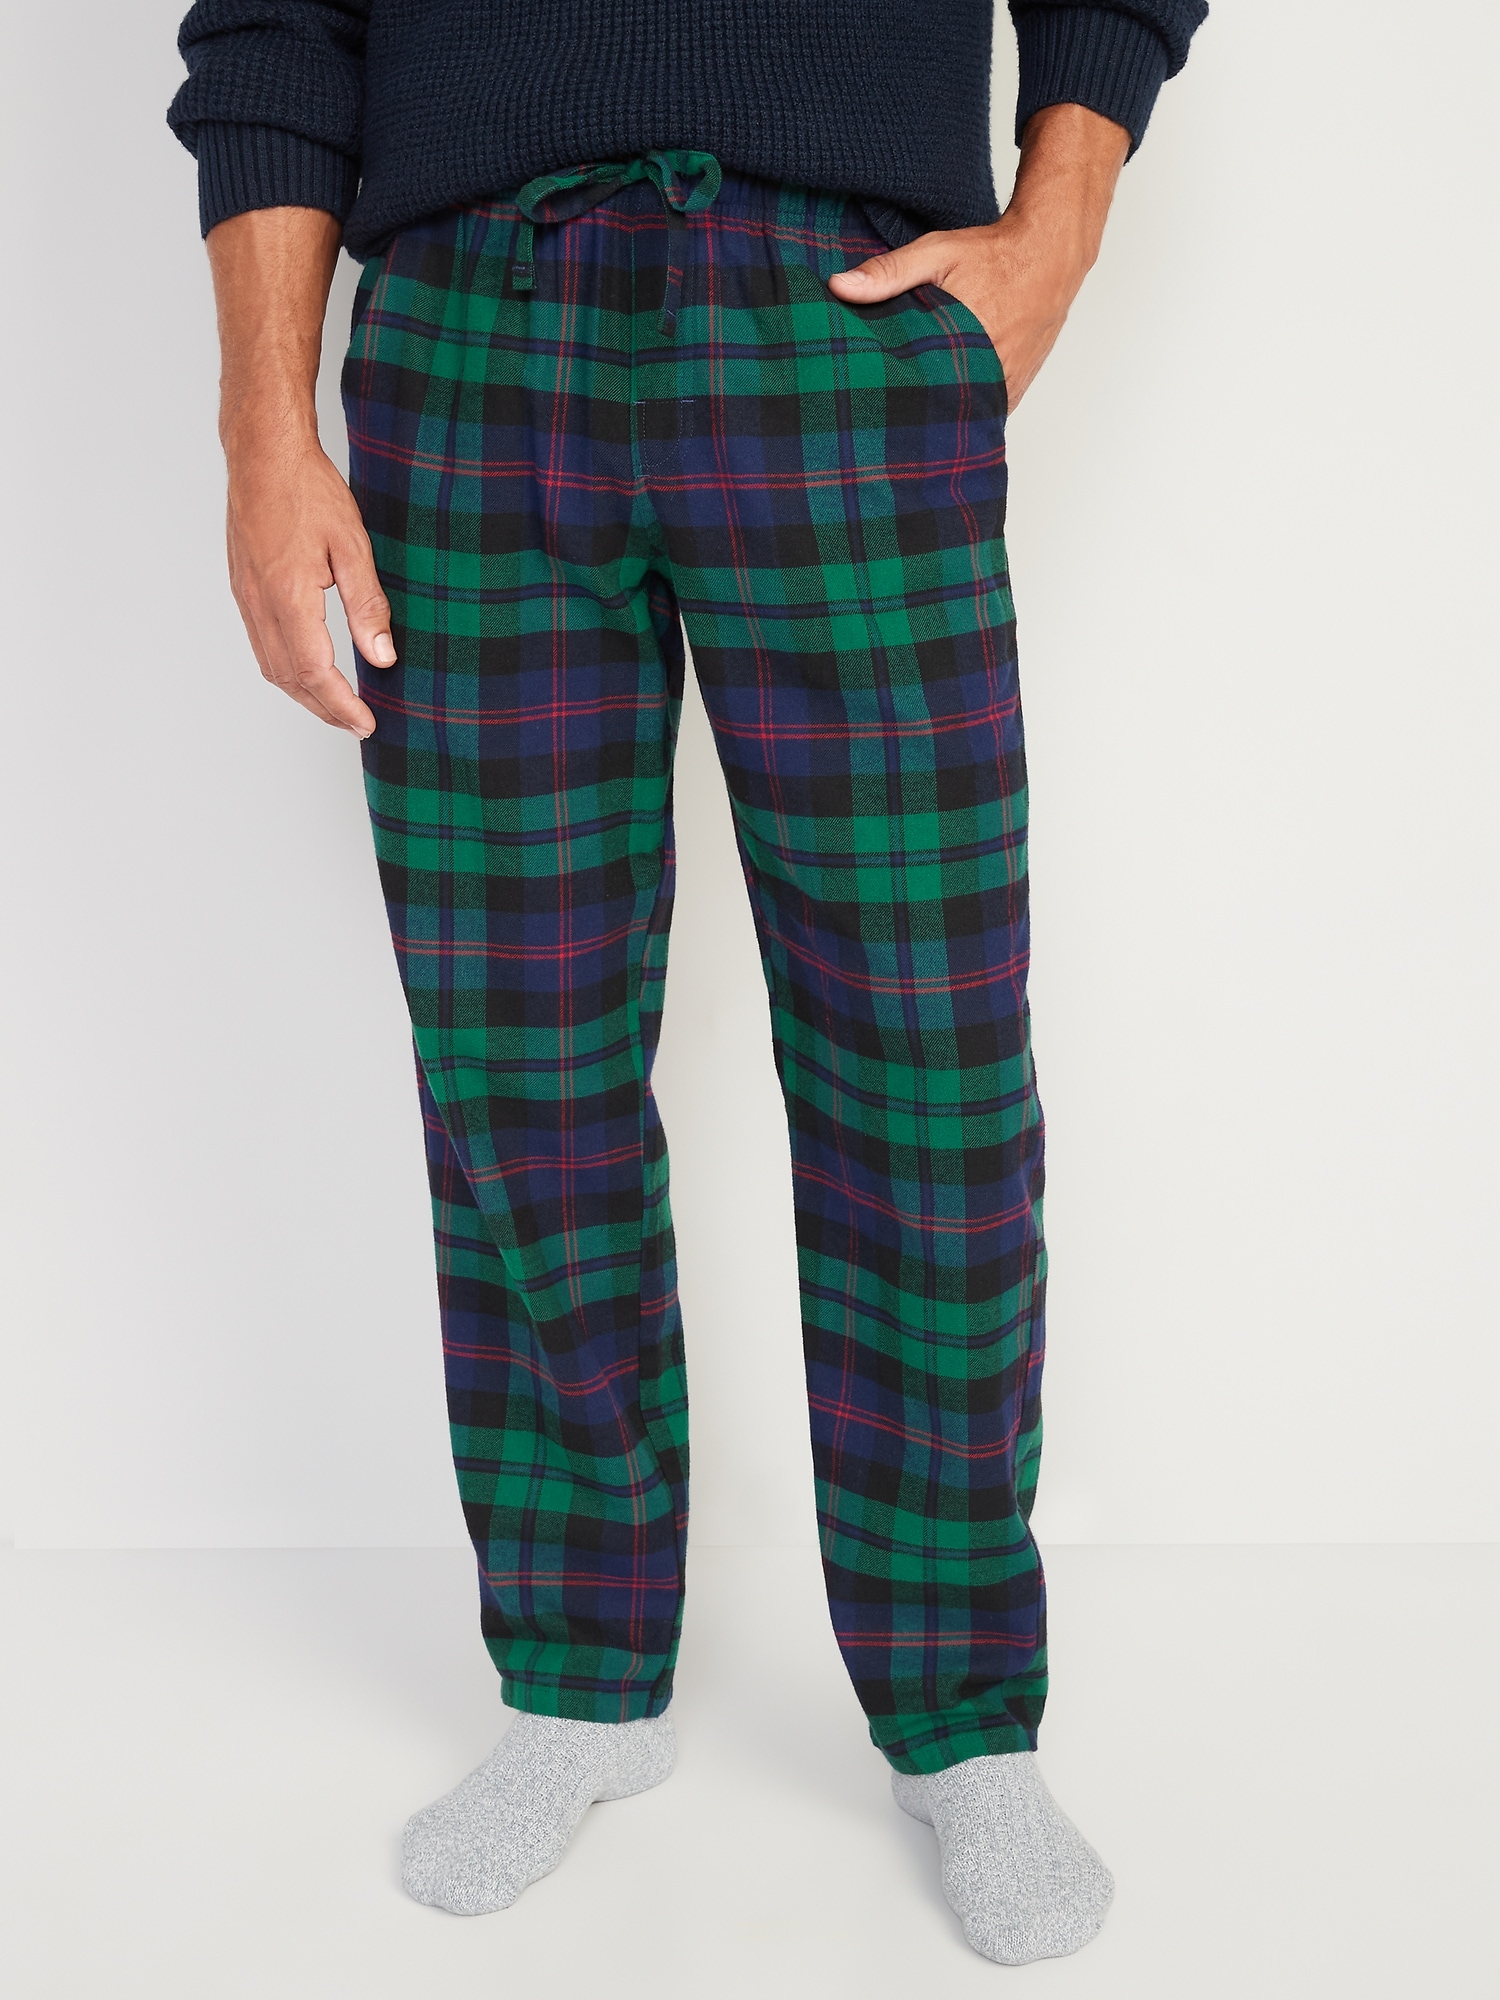 Matching Printed Flannel Jogger Pajama Pants for Men  Old Navy